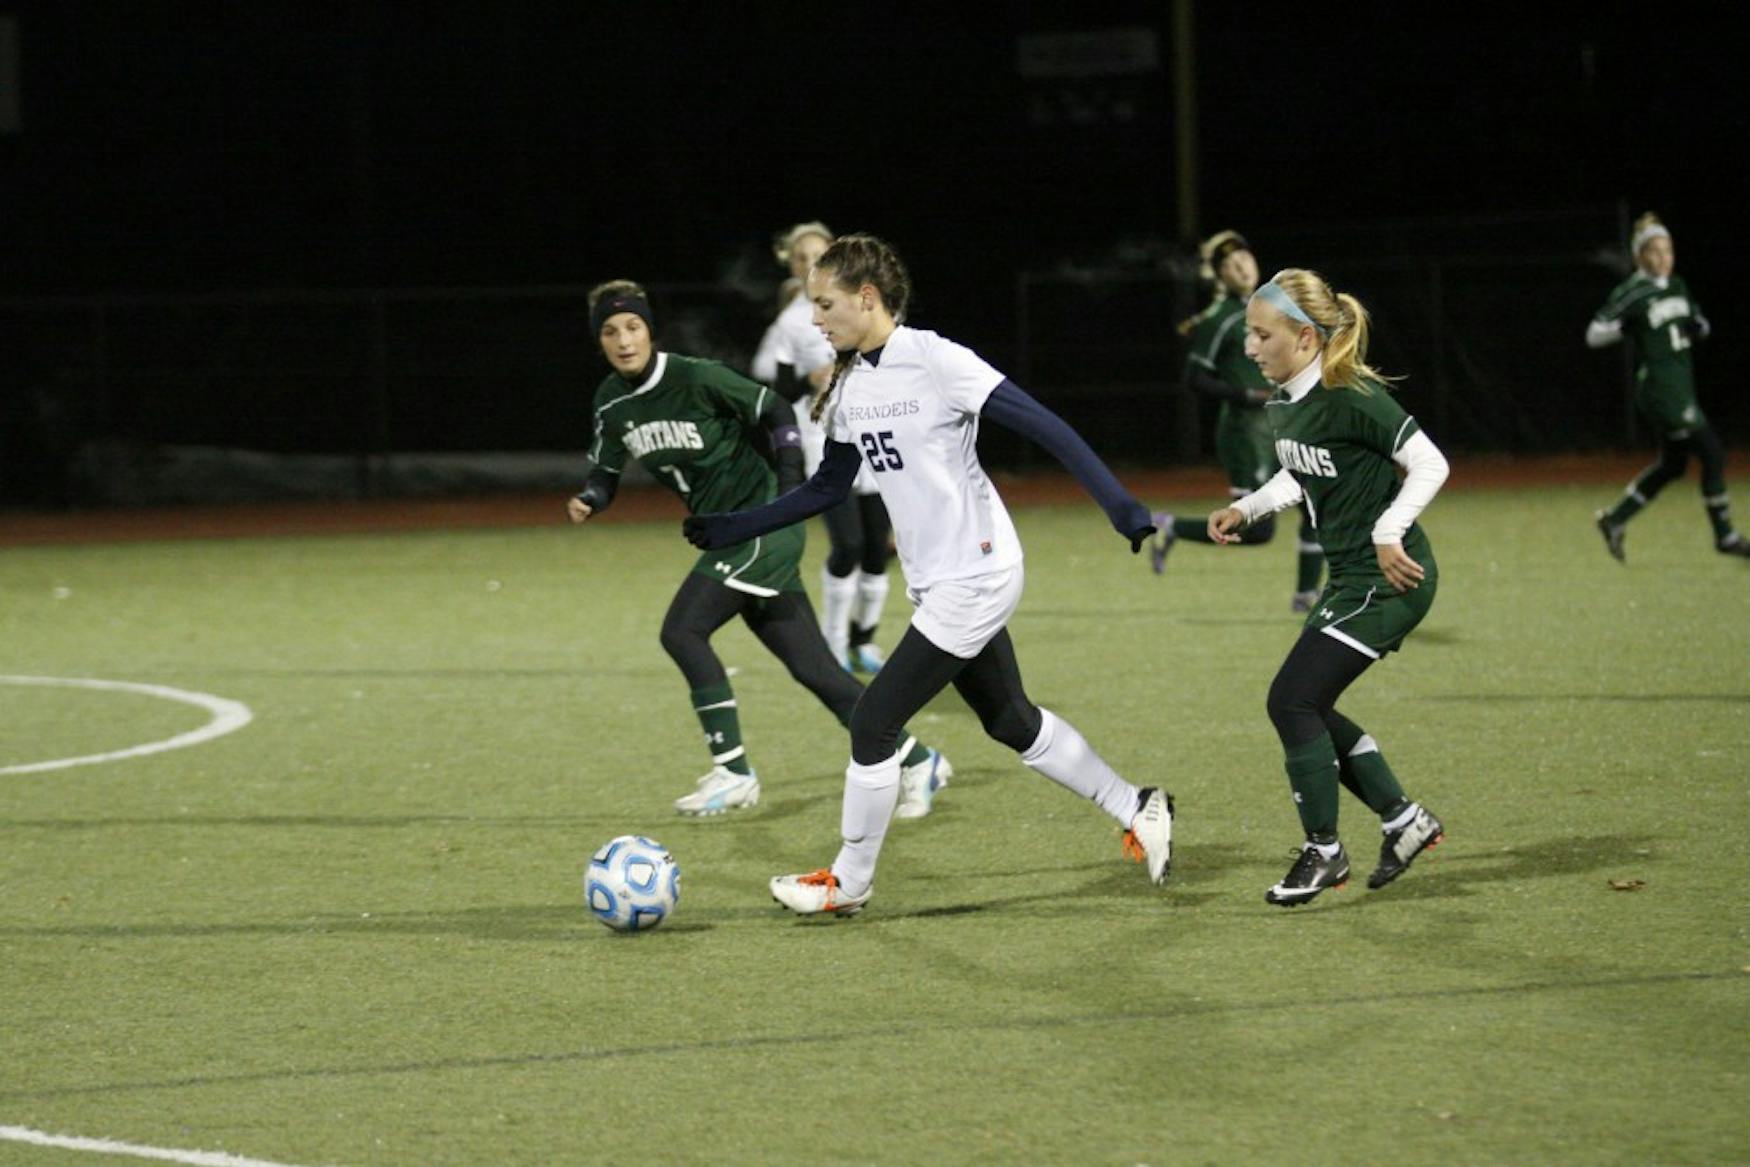 Forward Melissa Darling ’16 (center) dribbles between two Castleton State defenders during the Judges’ loss in the ECAC Tournament last November.